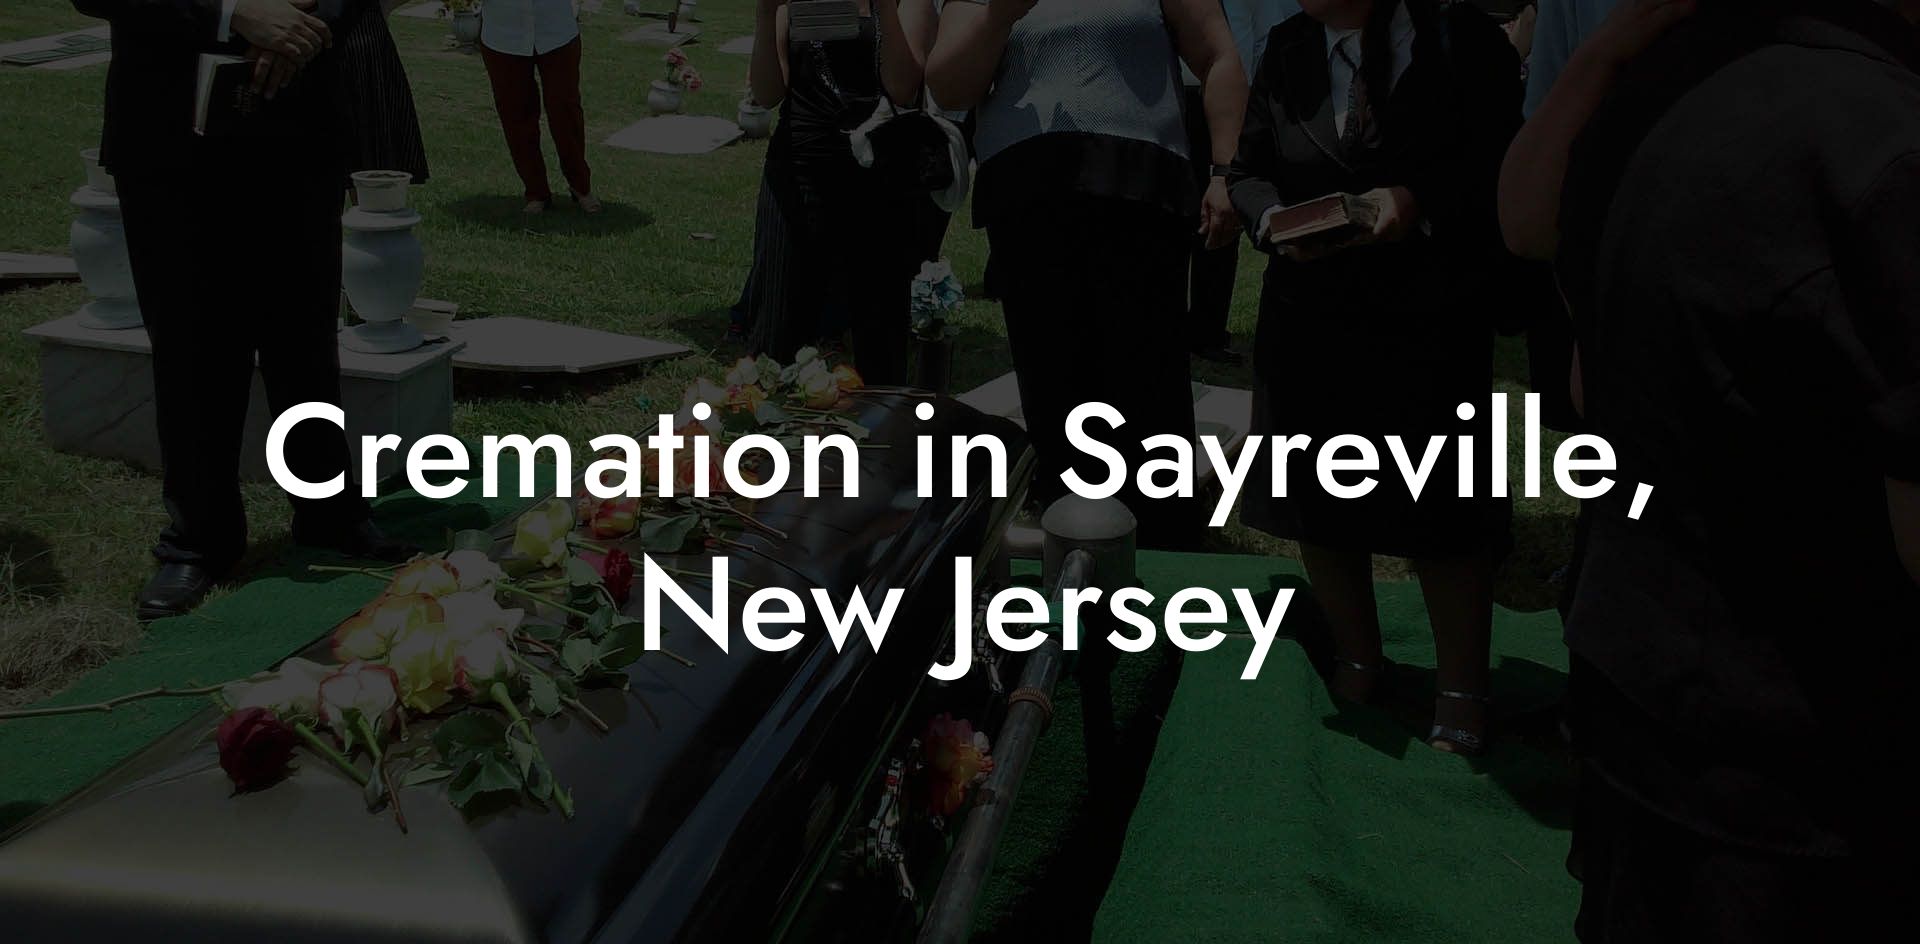 Cremation in Sayreville, New Jersey